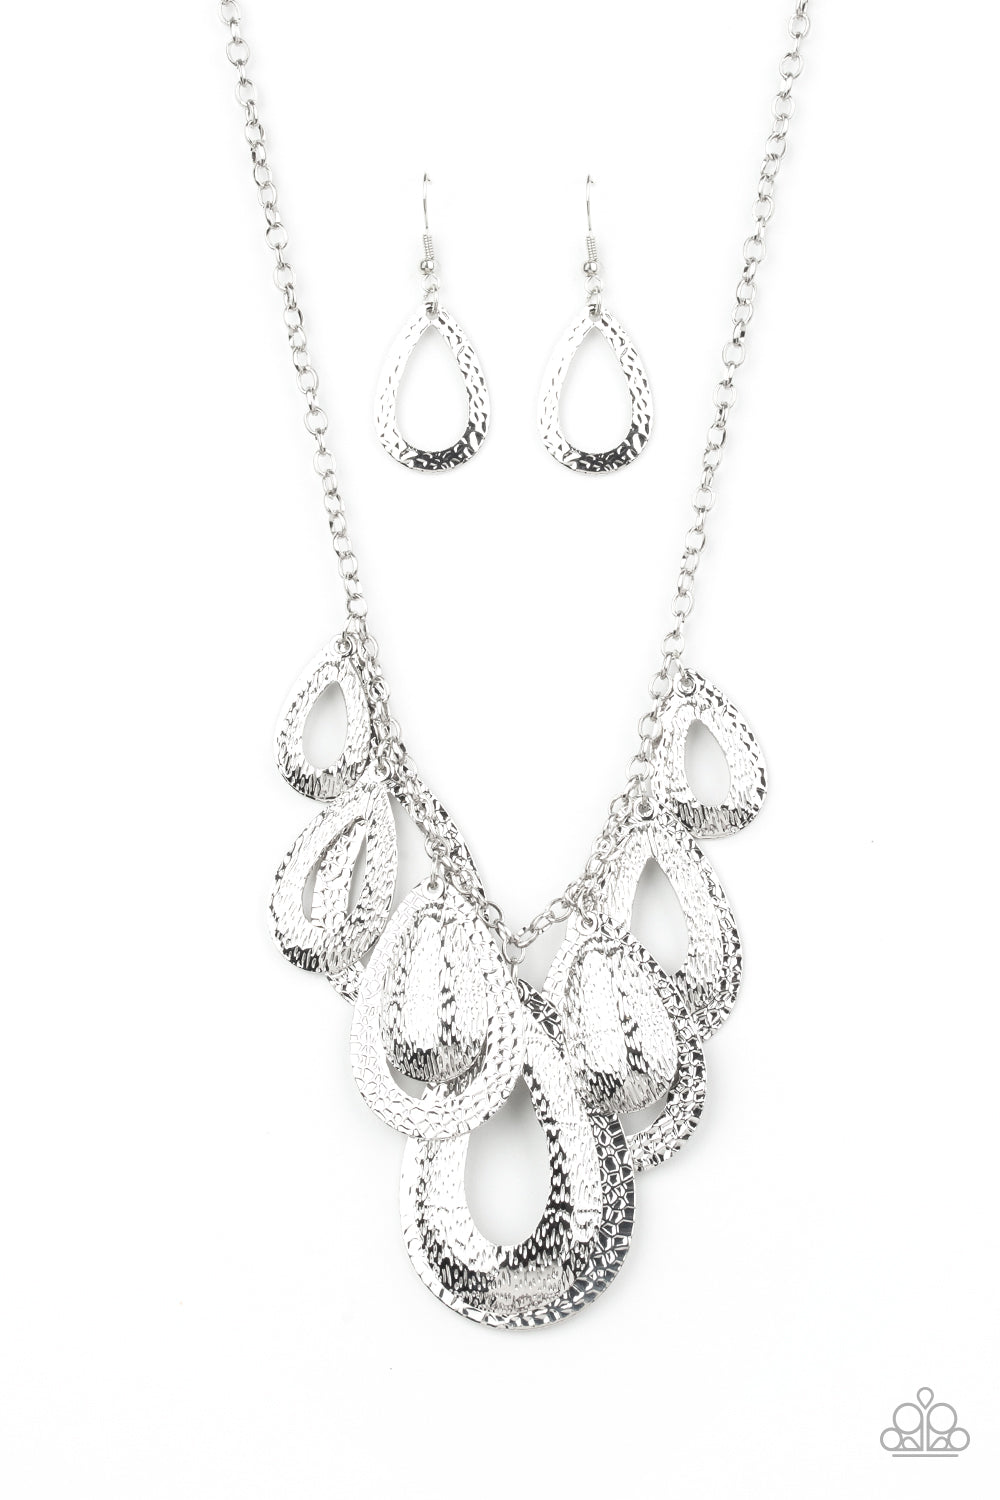 Paparazzi Accessories - Teardrop Tempest - Silver Necklace - Alies Bling Bar